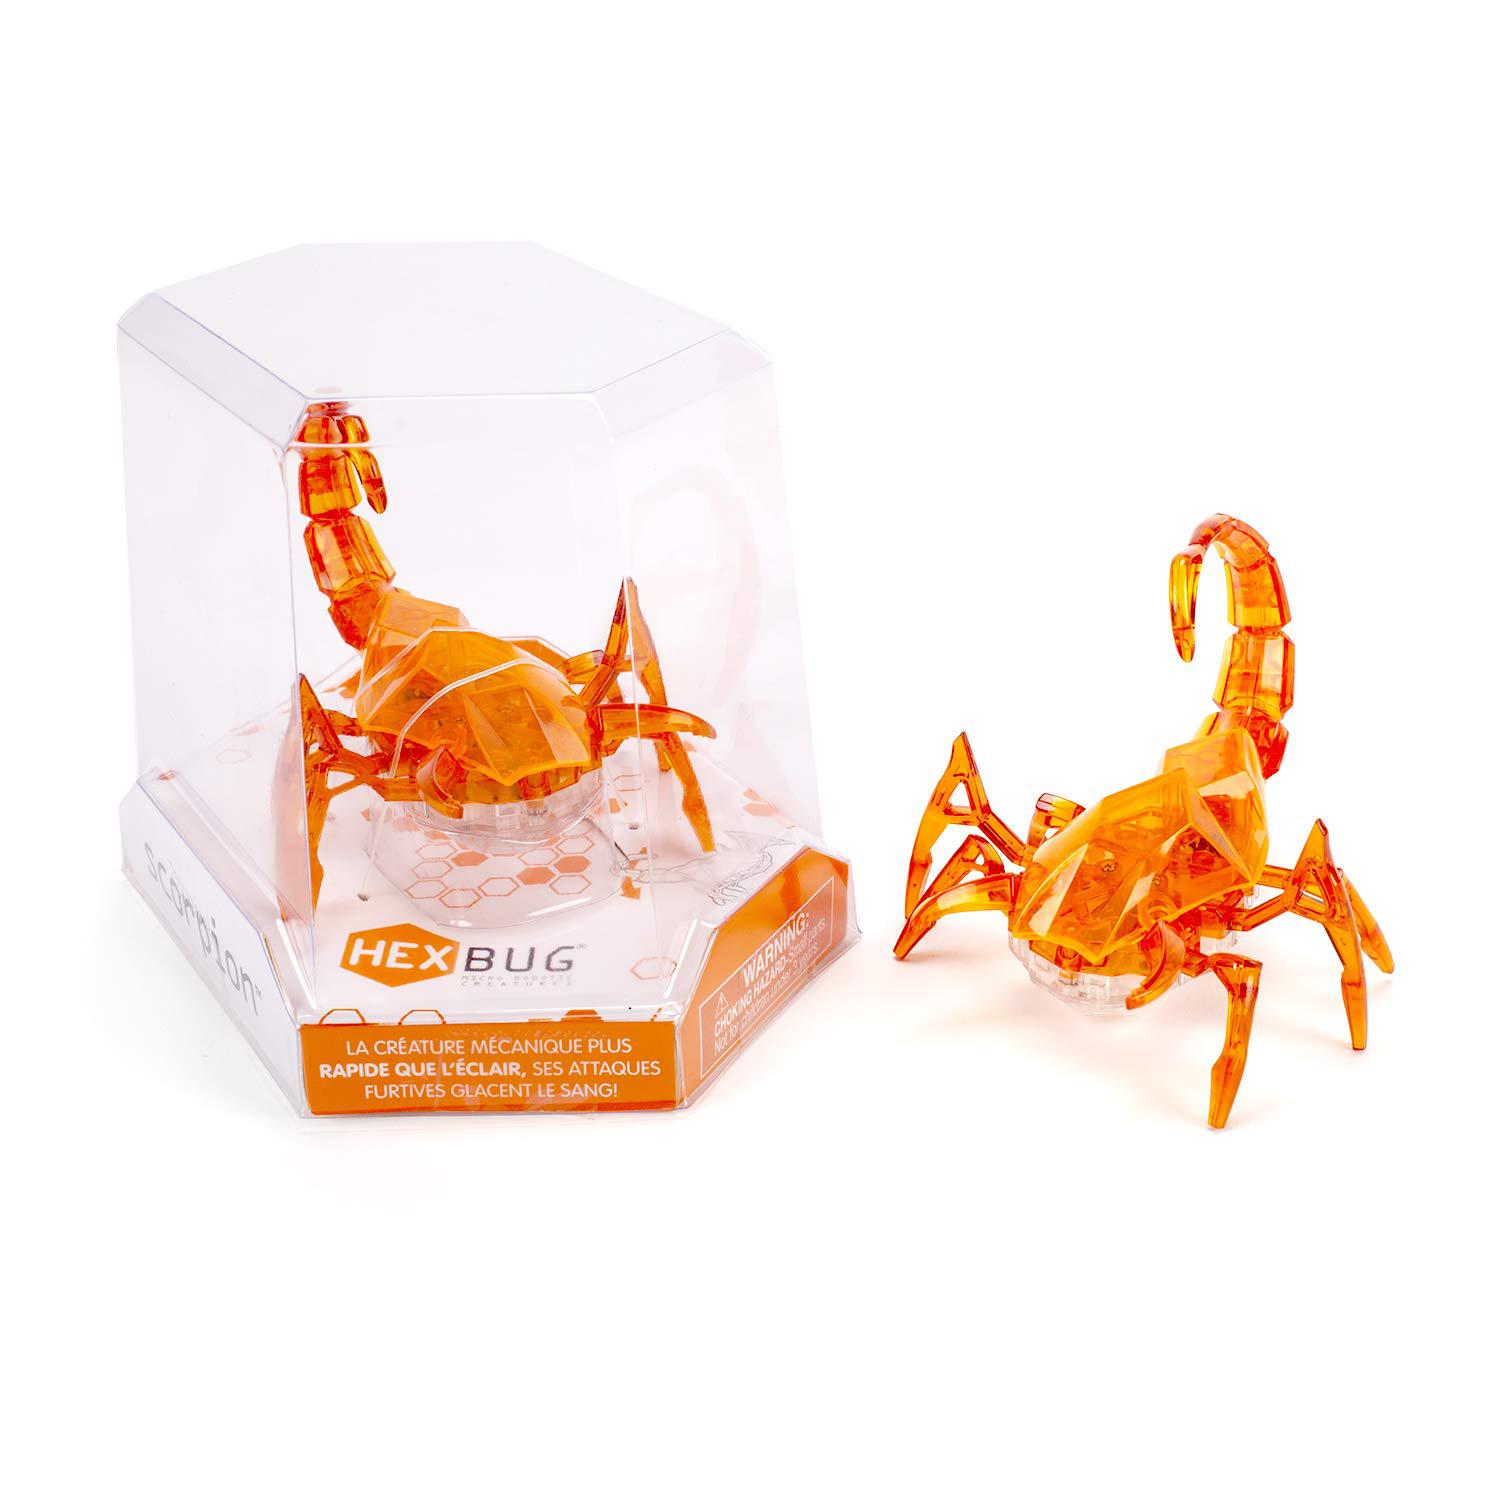 Hexbug by Innovation First hexbug scorpion, electronic autonomous robotic pet, ages 8 and up (random color)